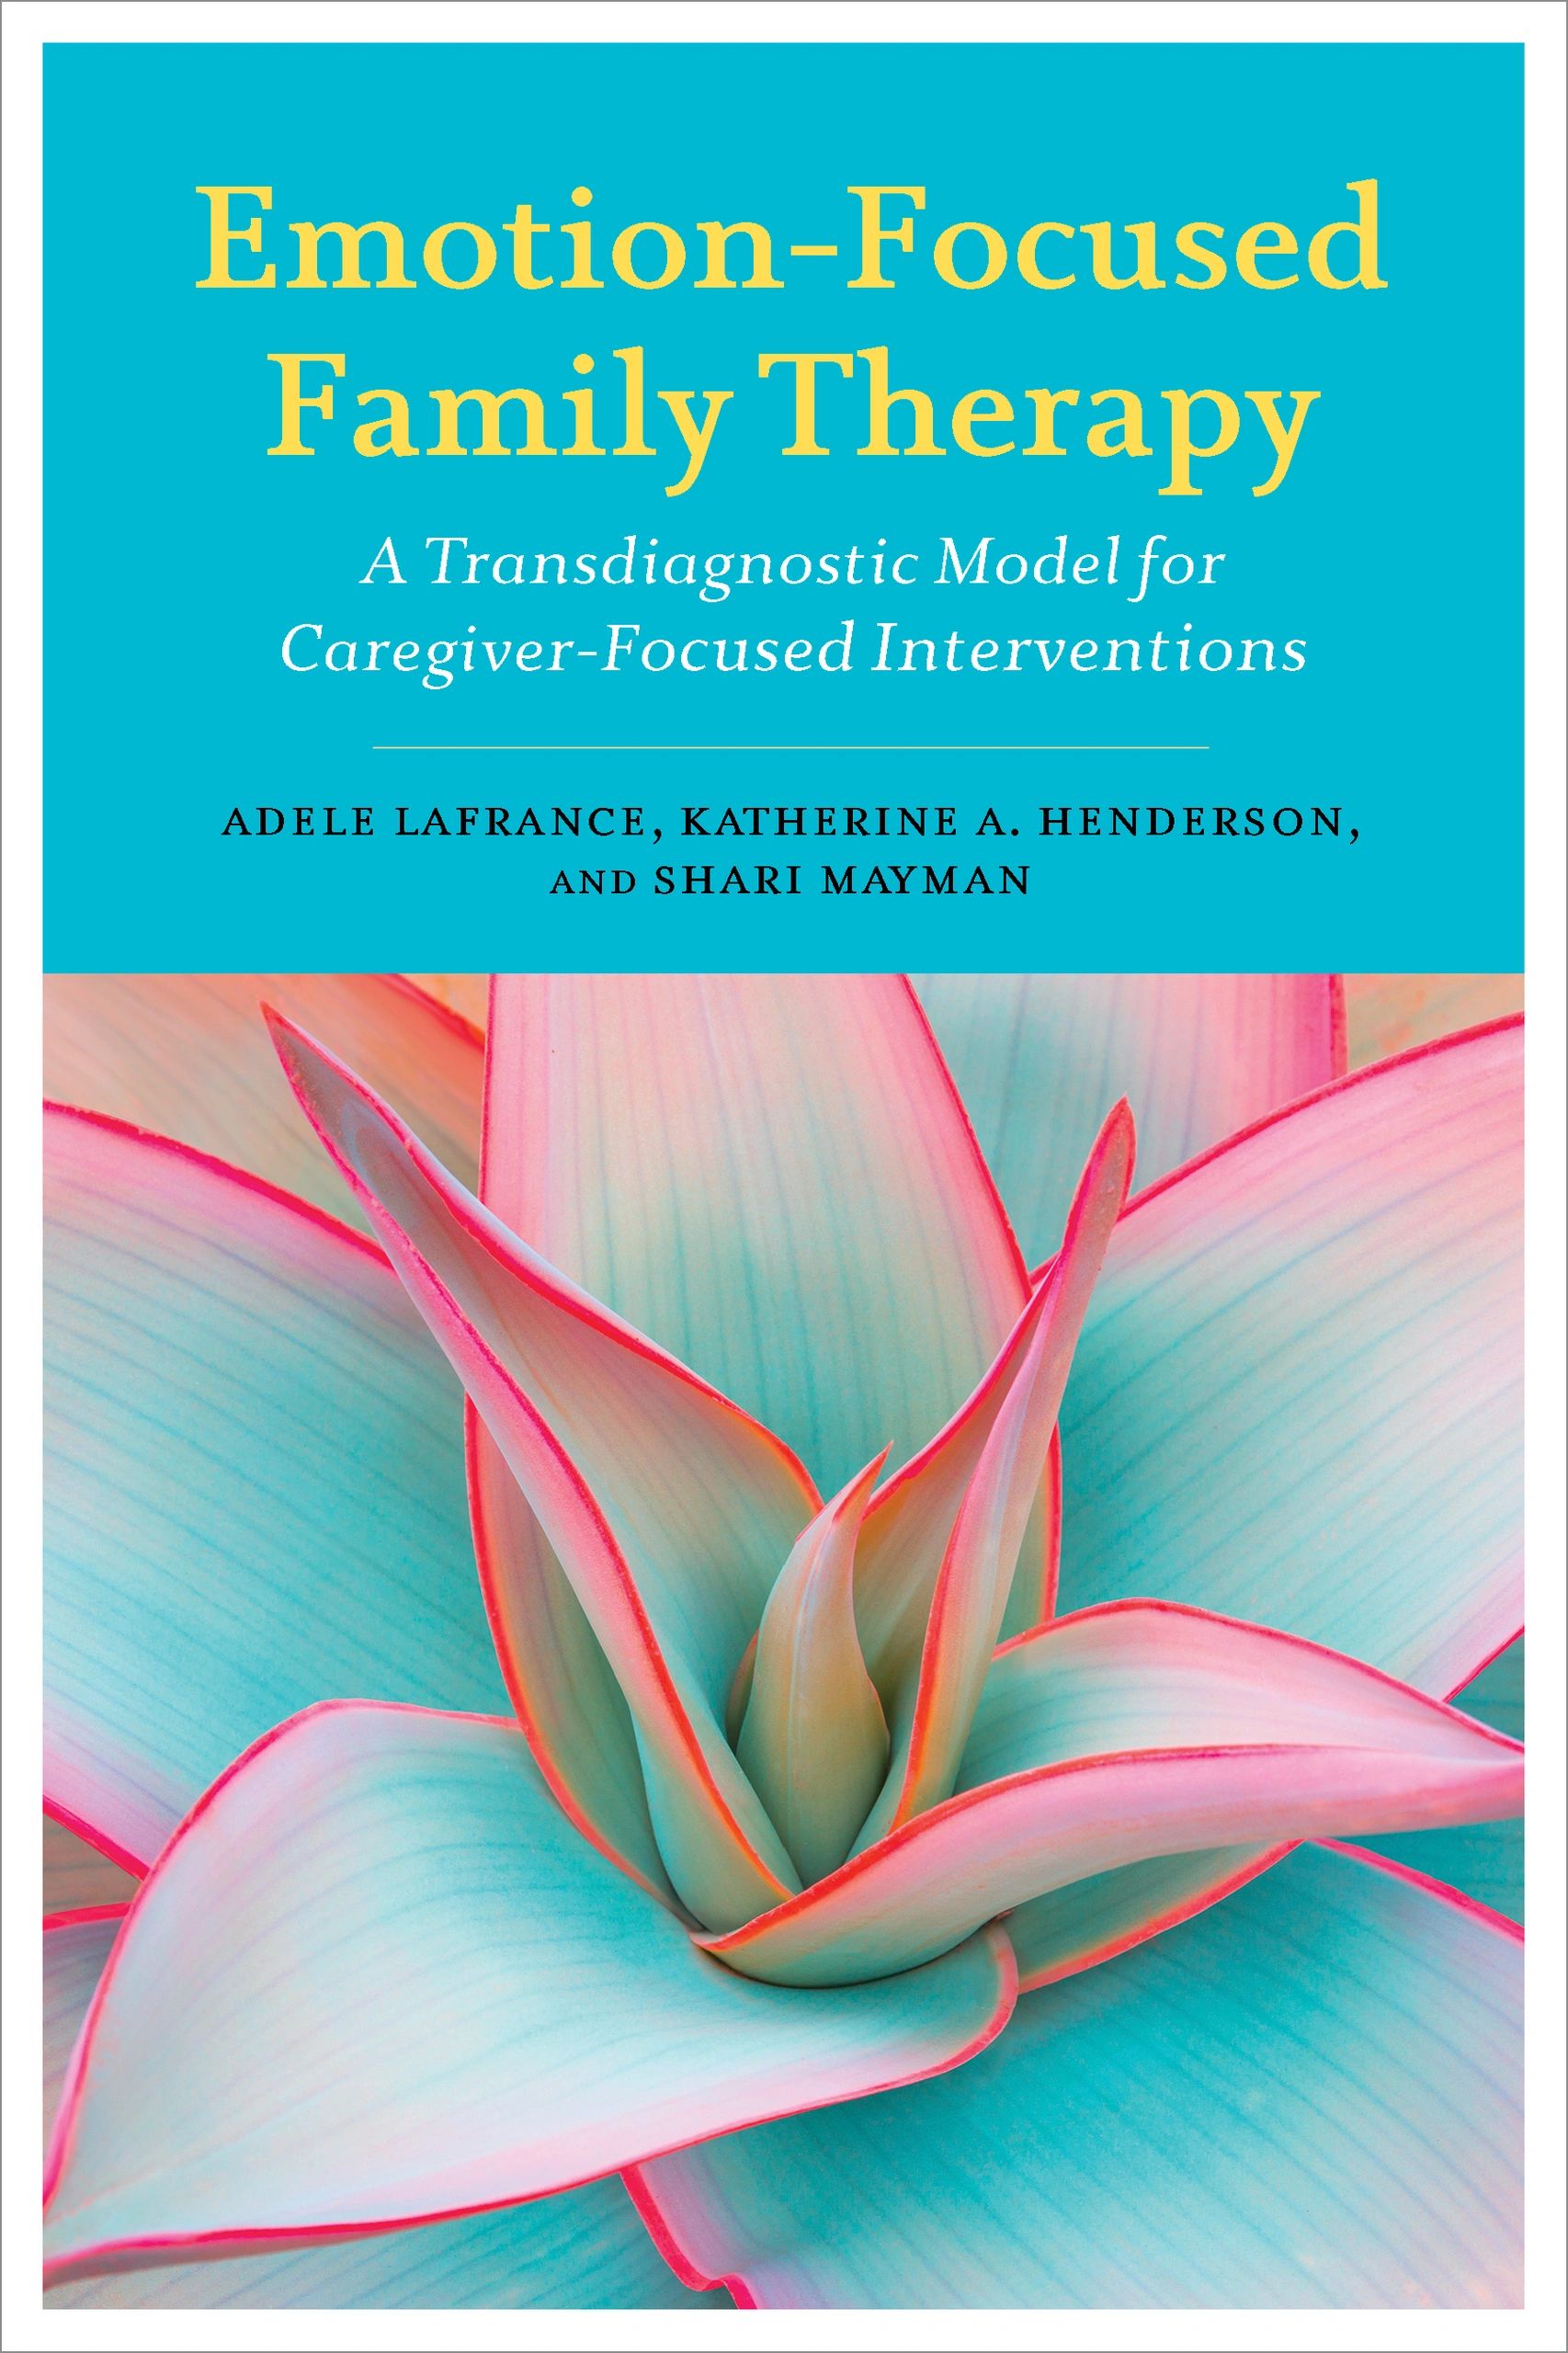 Emotion-Focused Family Therapy manual written by Adele Lafrance and colleagues.